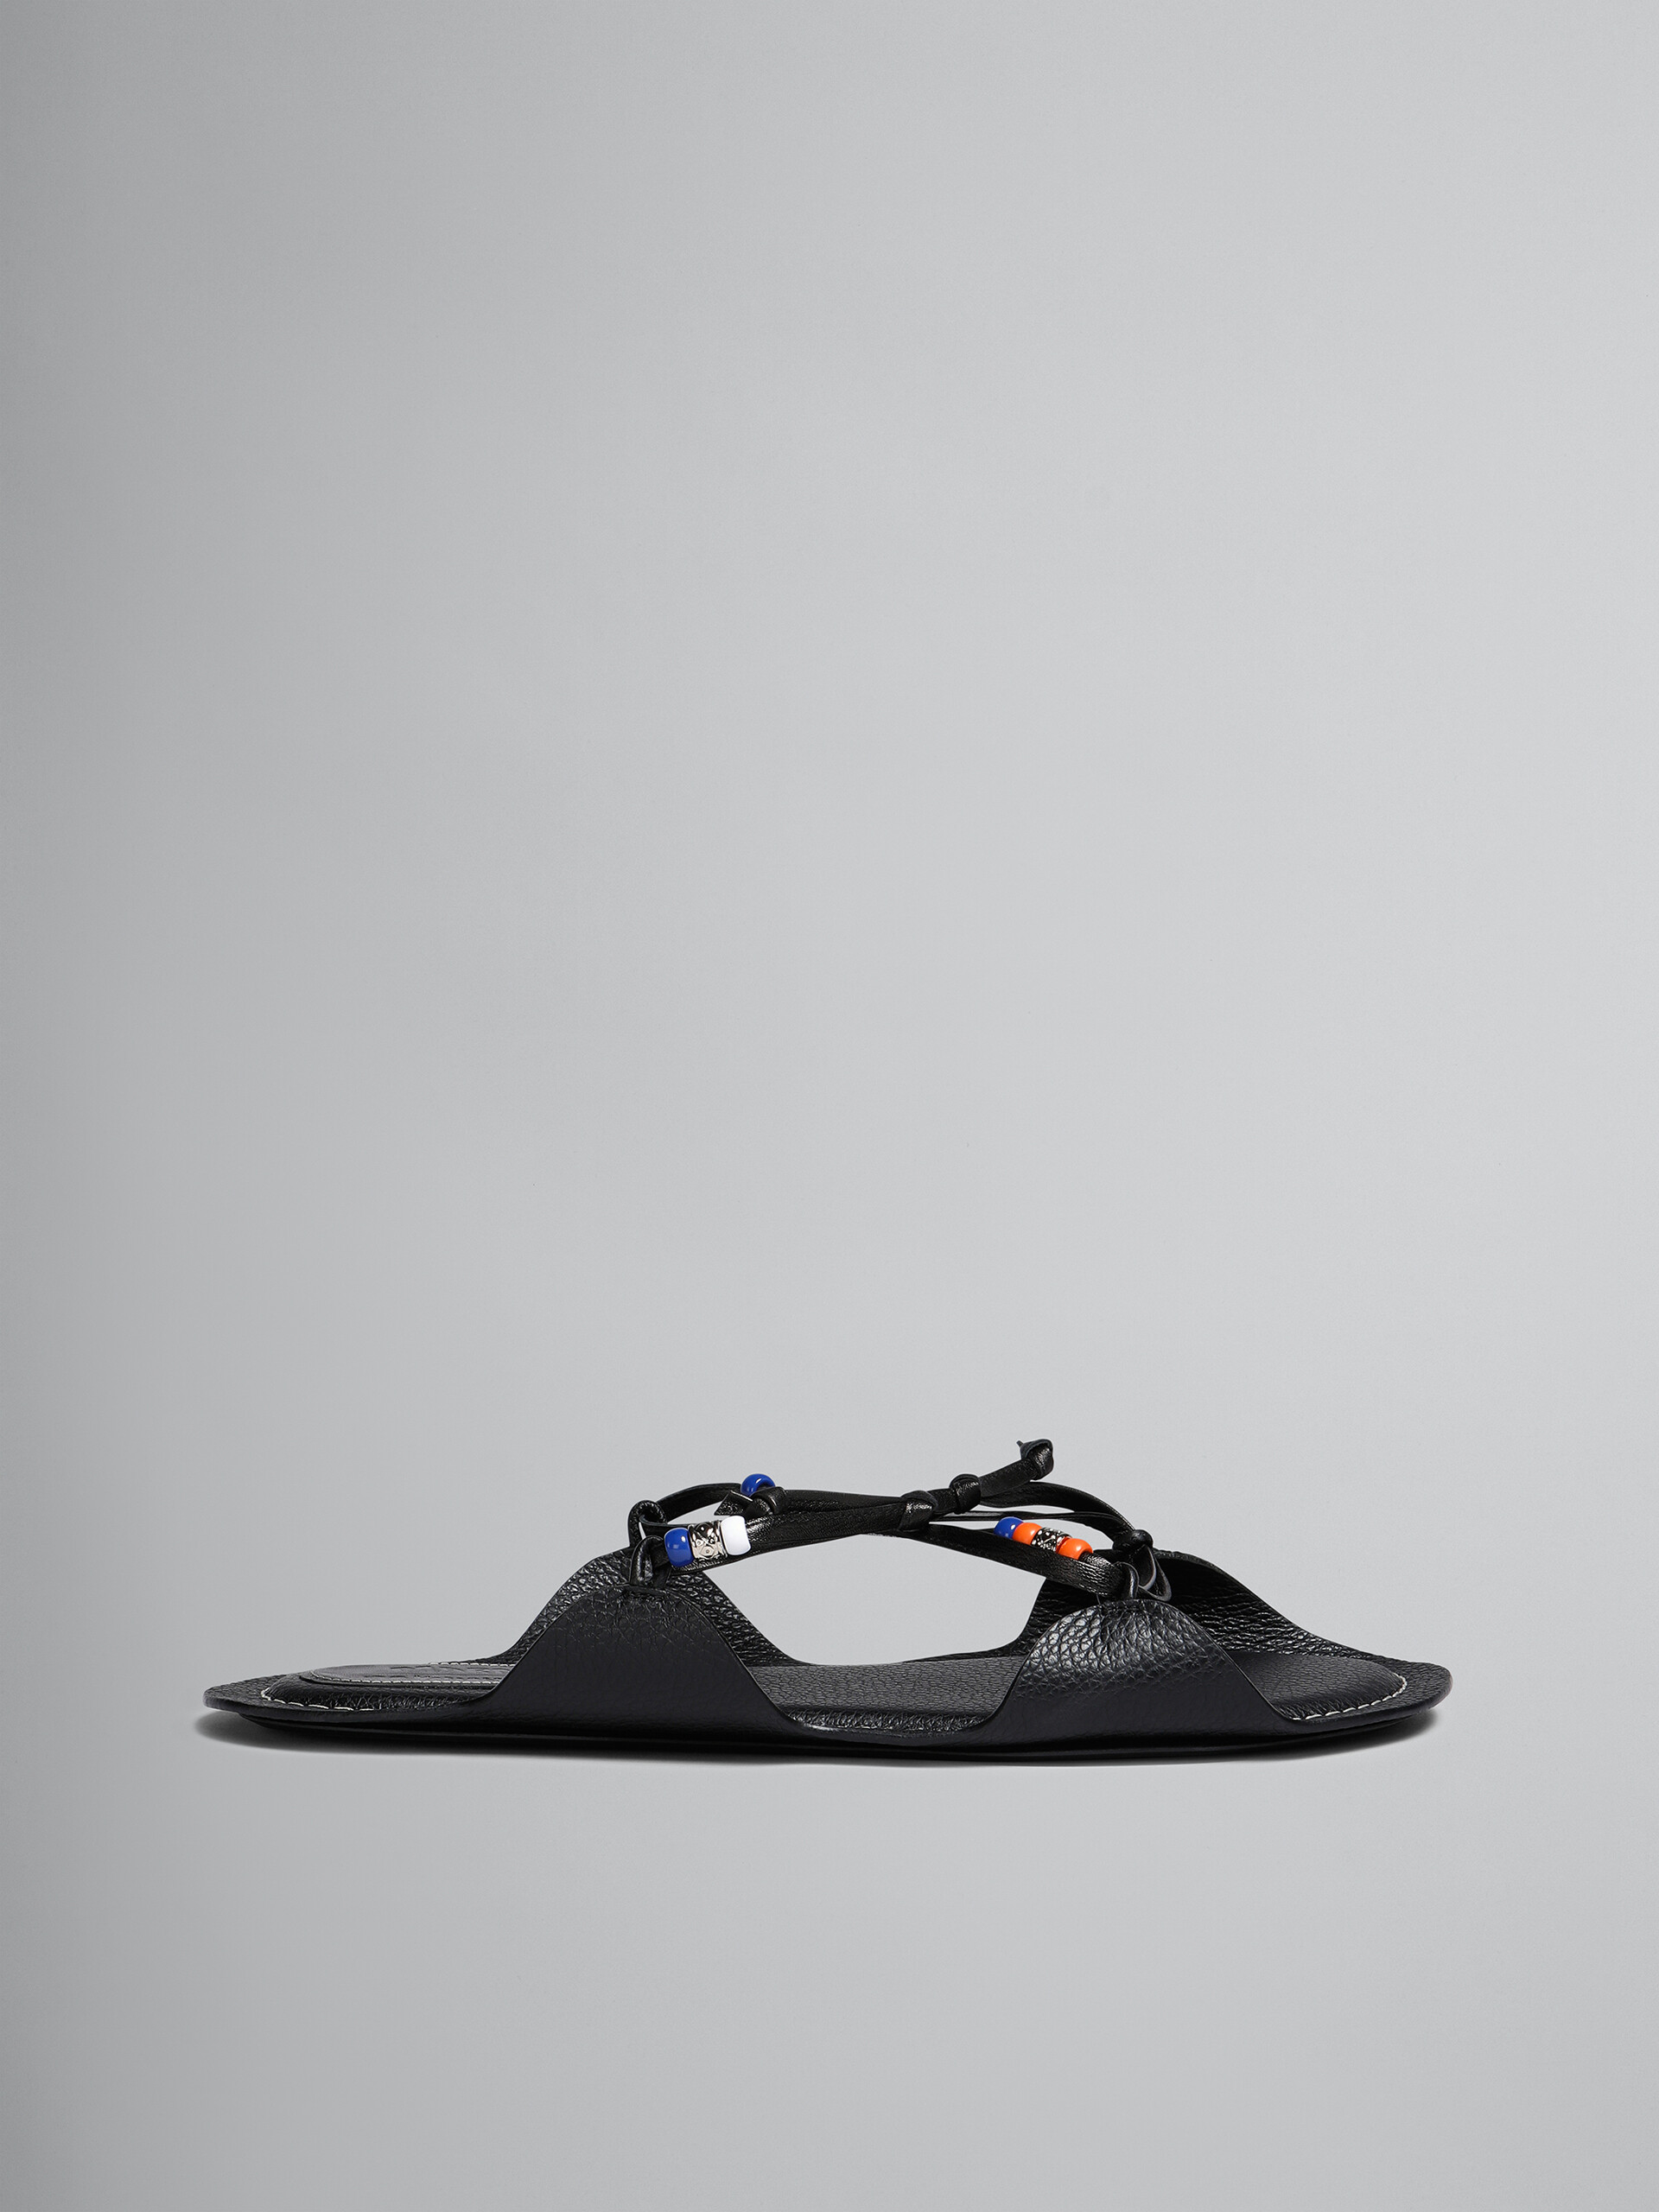 Marni x No Vacancy Inn - Black leather sandals with beads - Sandals - Image 1